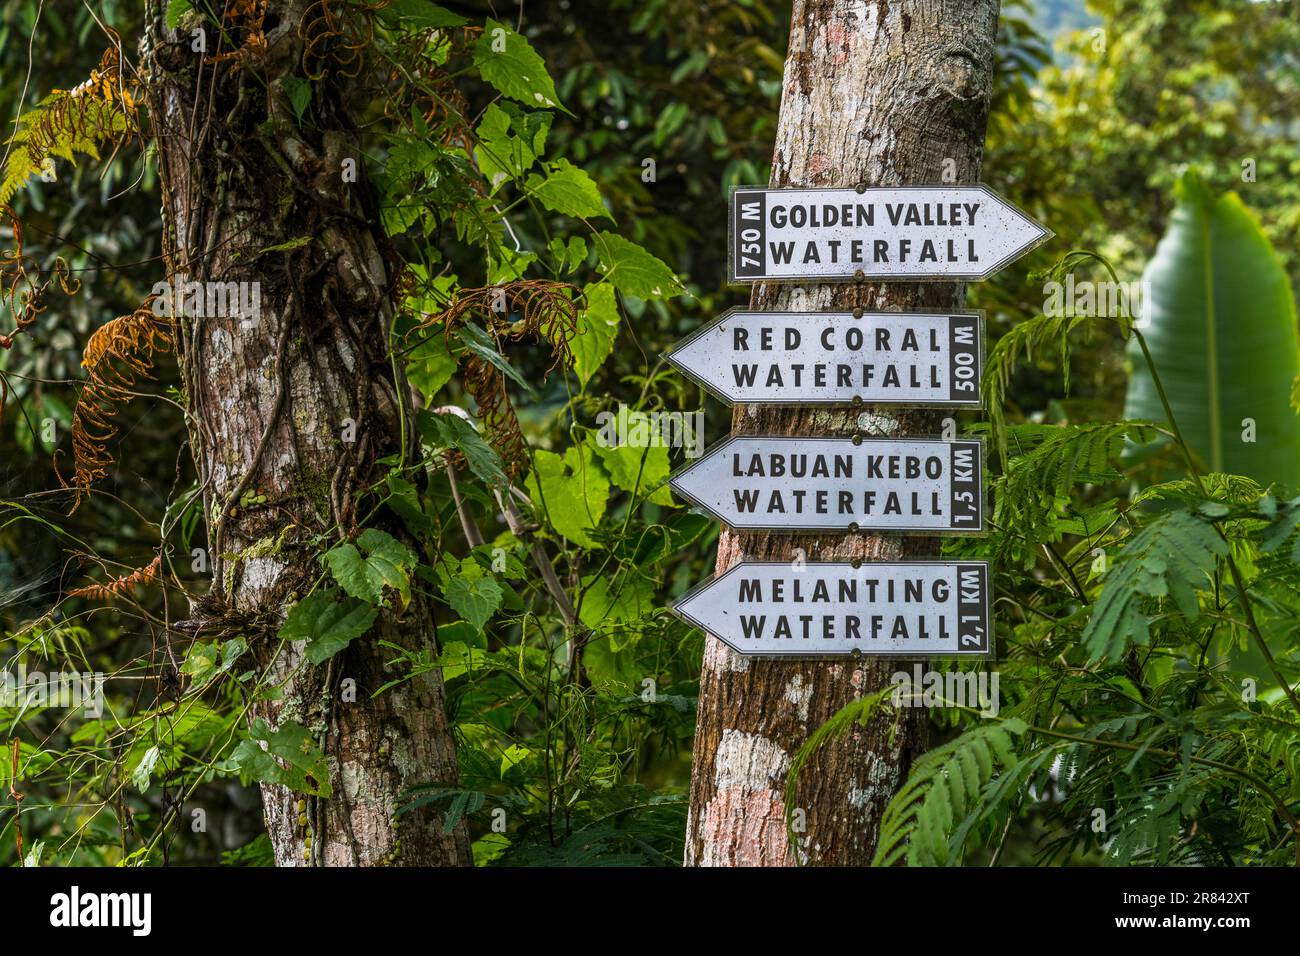 Information board indicating the paths for the different Munduk waterfalls, on the island of Bali. Stock Photo